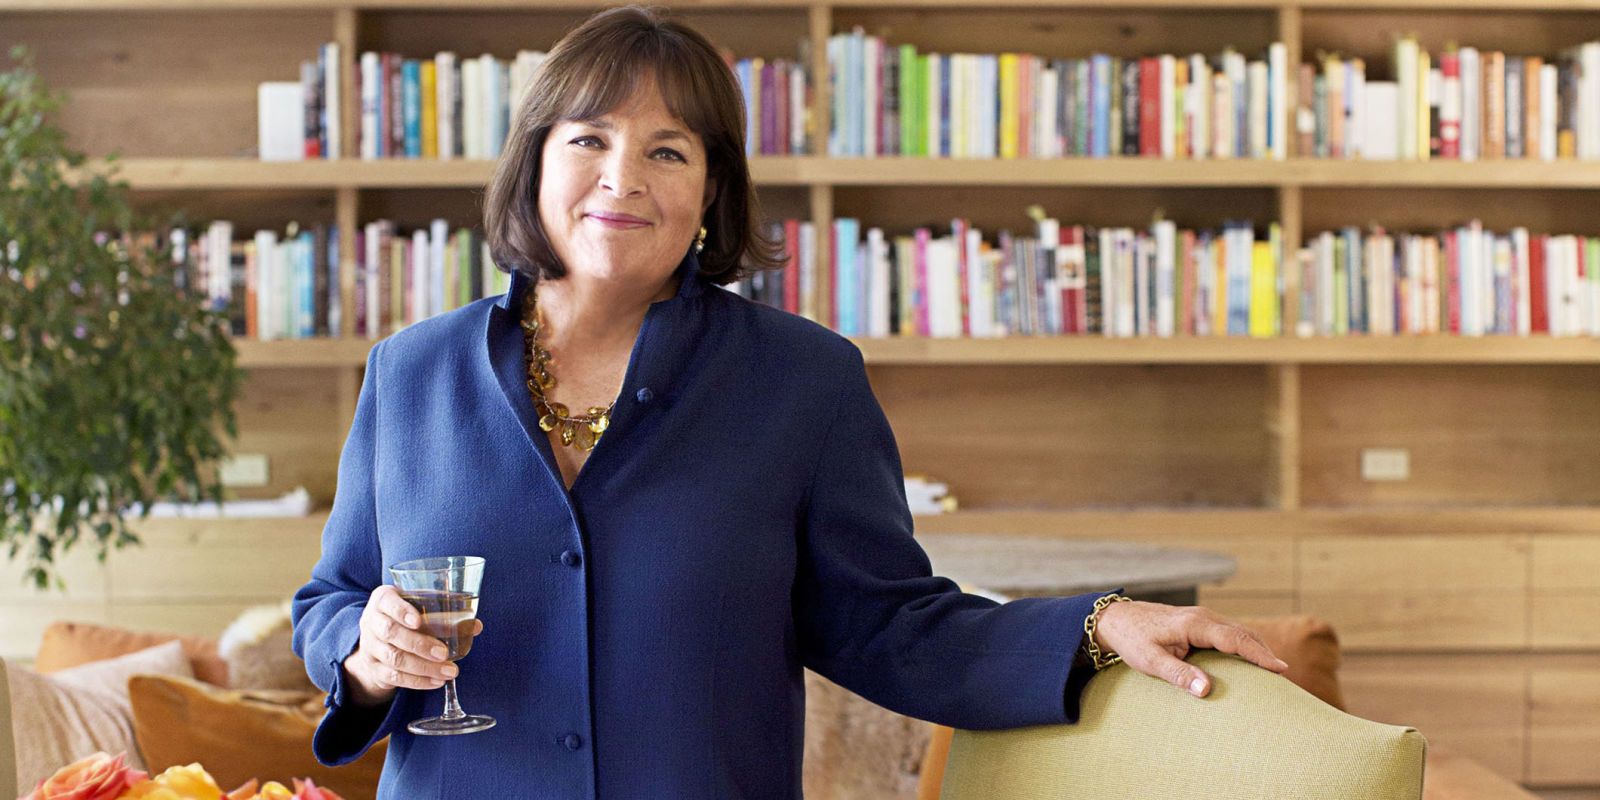 What is Barefoot Contessa net worth